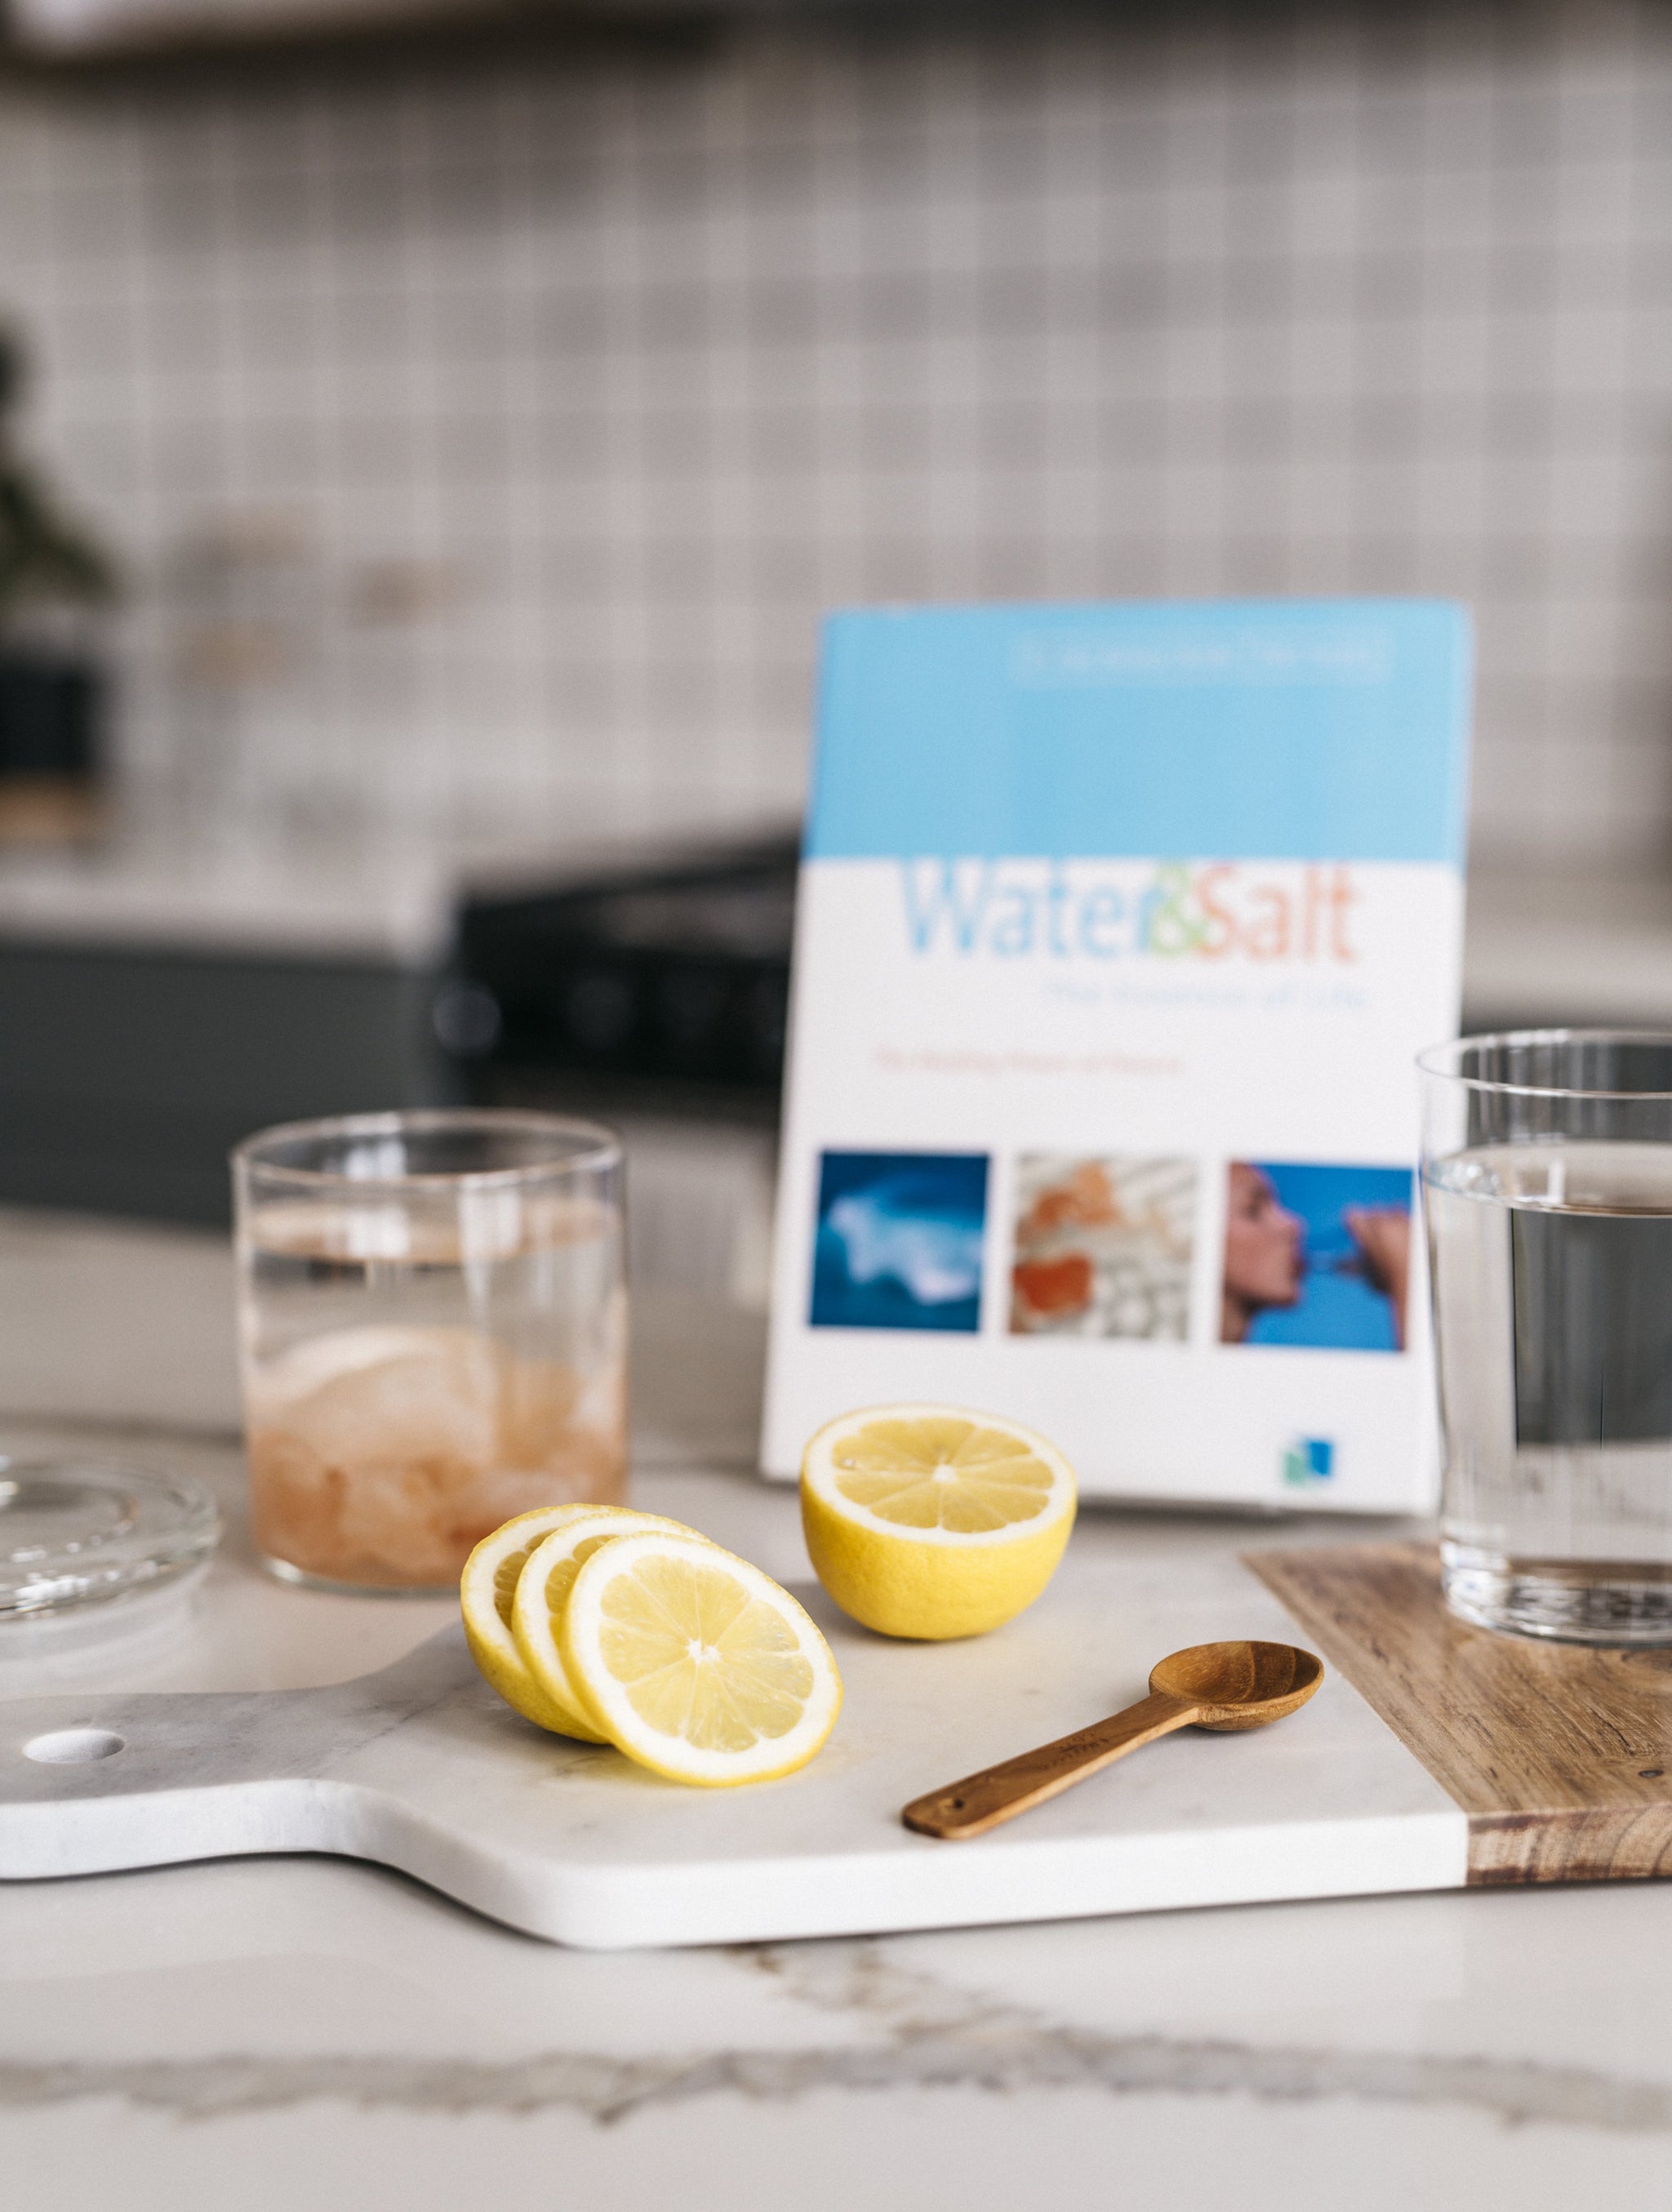 "Water & Salt: the Essence of Life" by Dr. Hendel and Peter Ferreira with Sole and lemon water right view